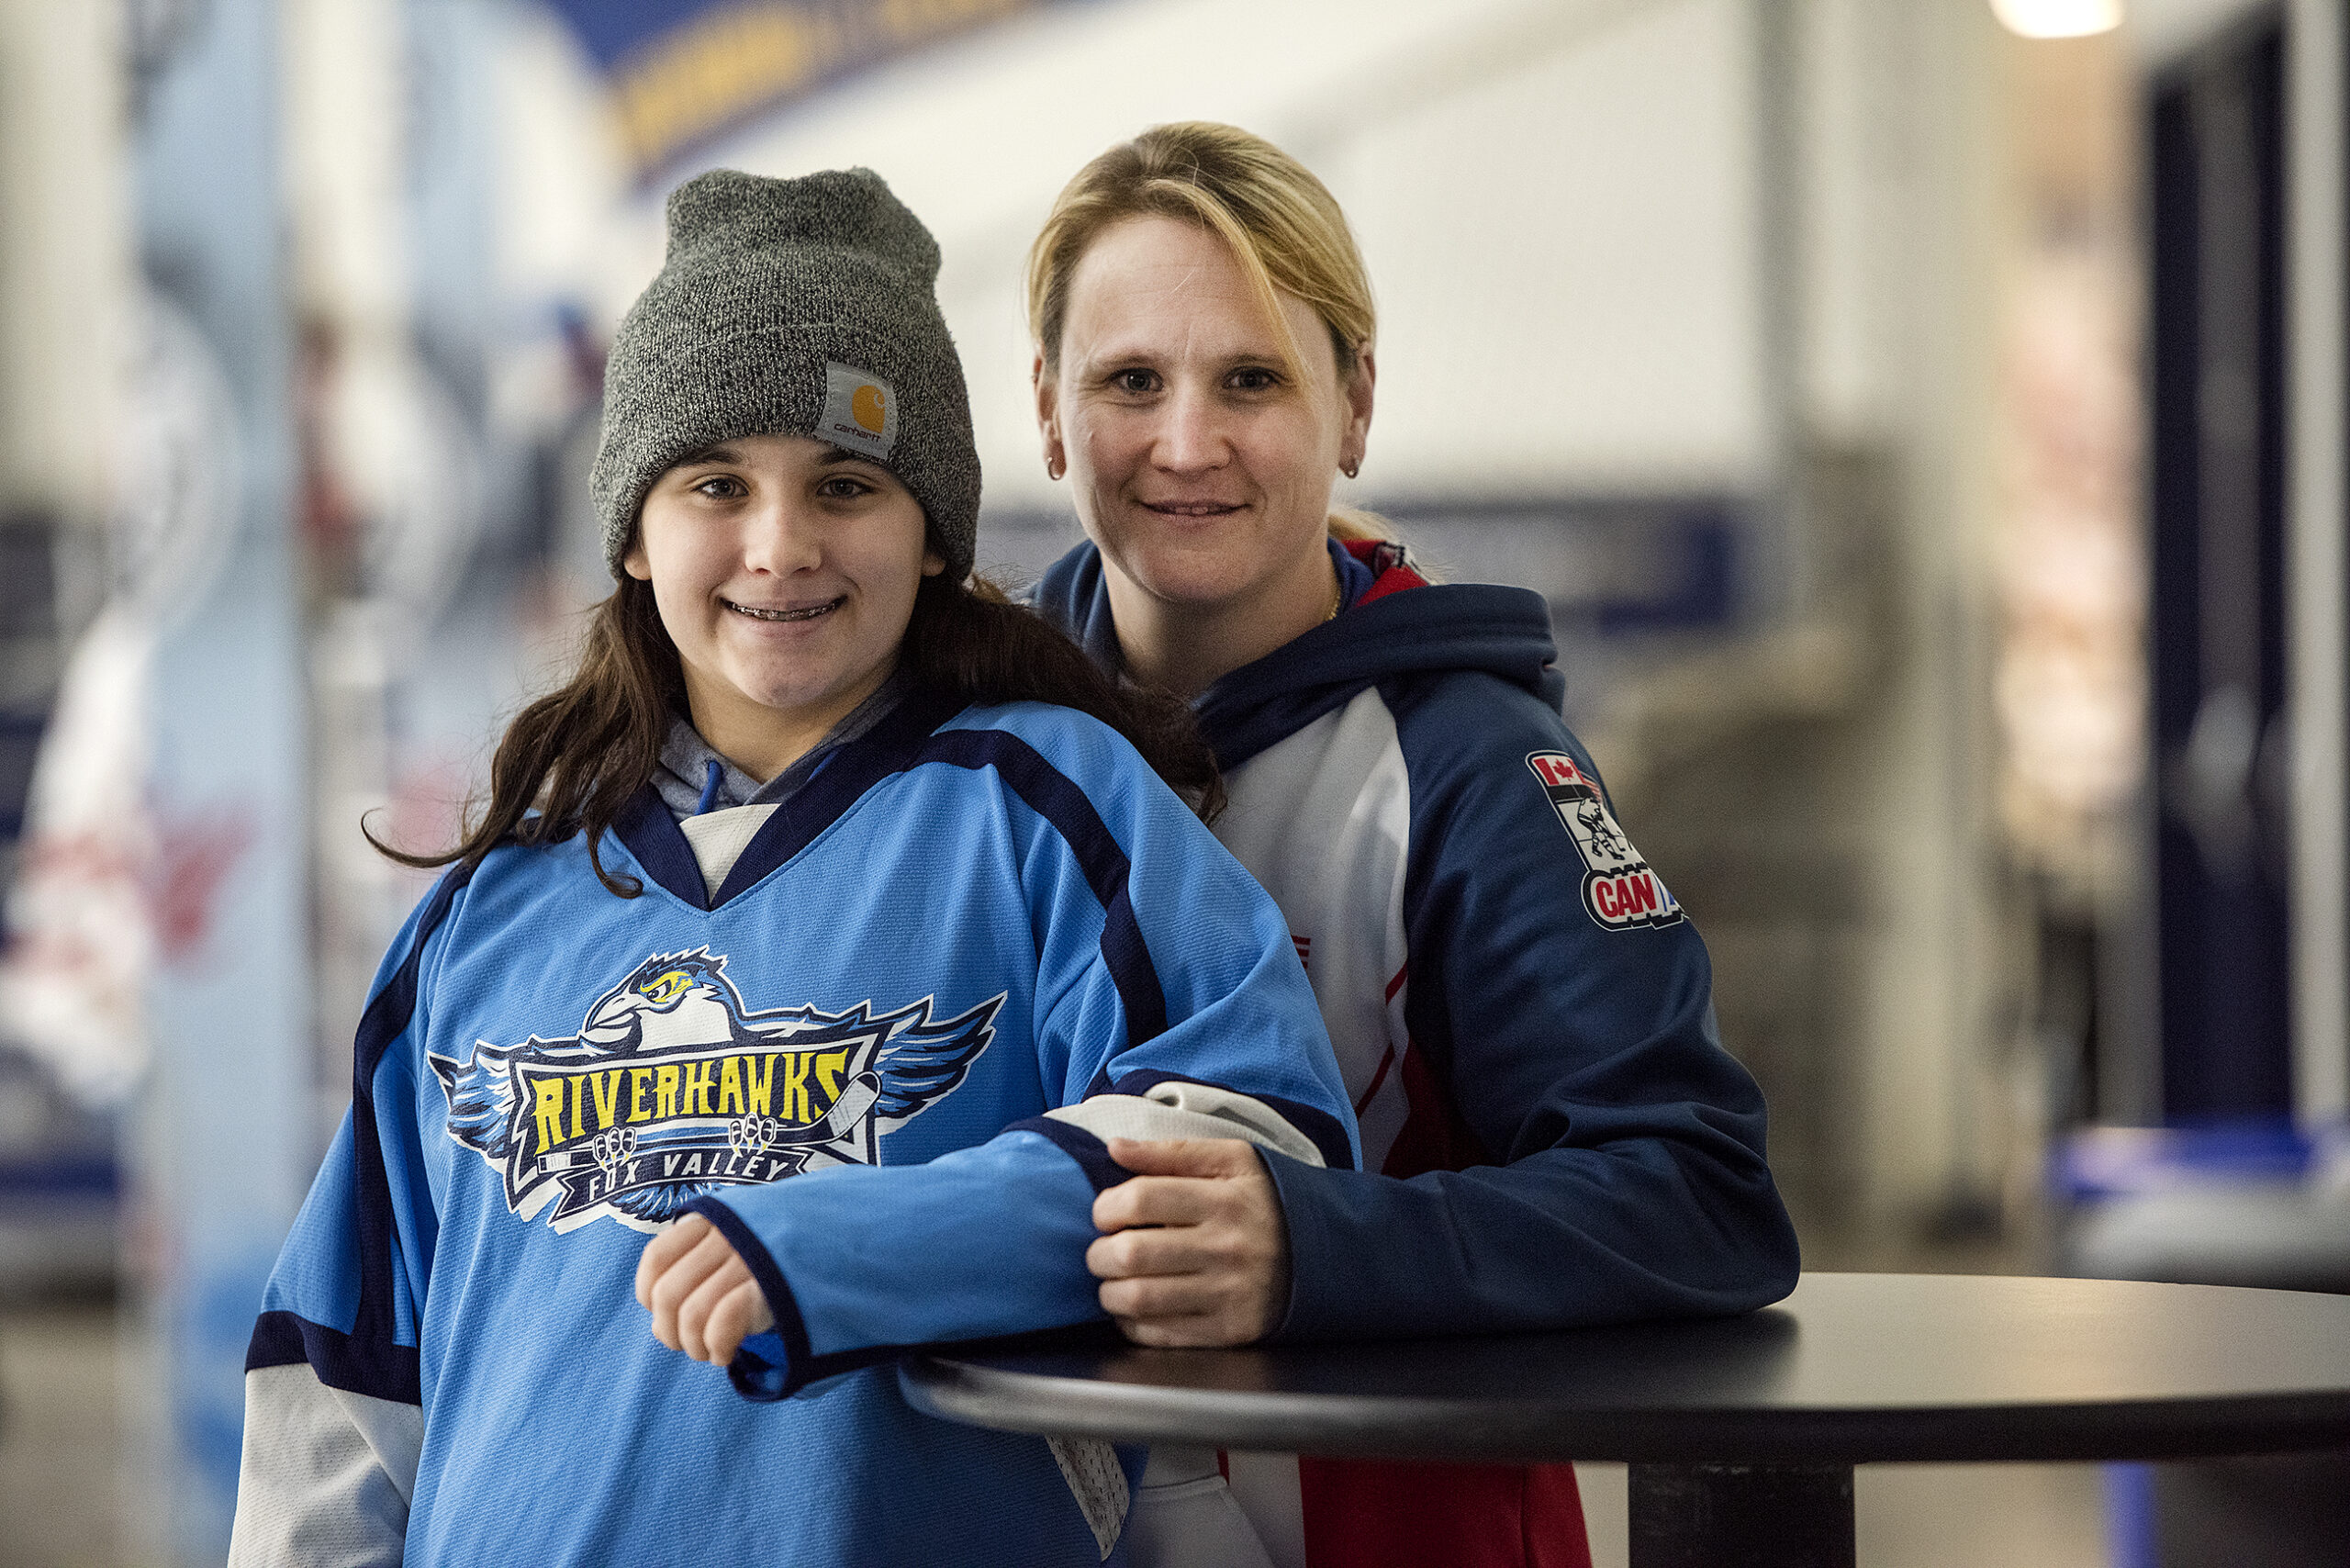 A woman stands with her daughter at a hockey rink.